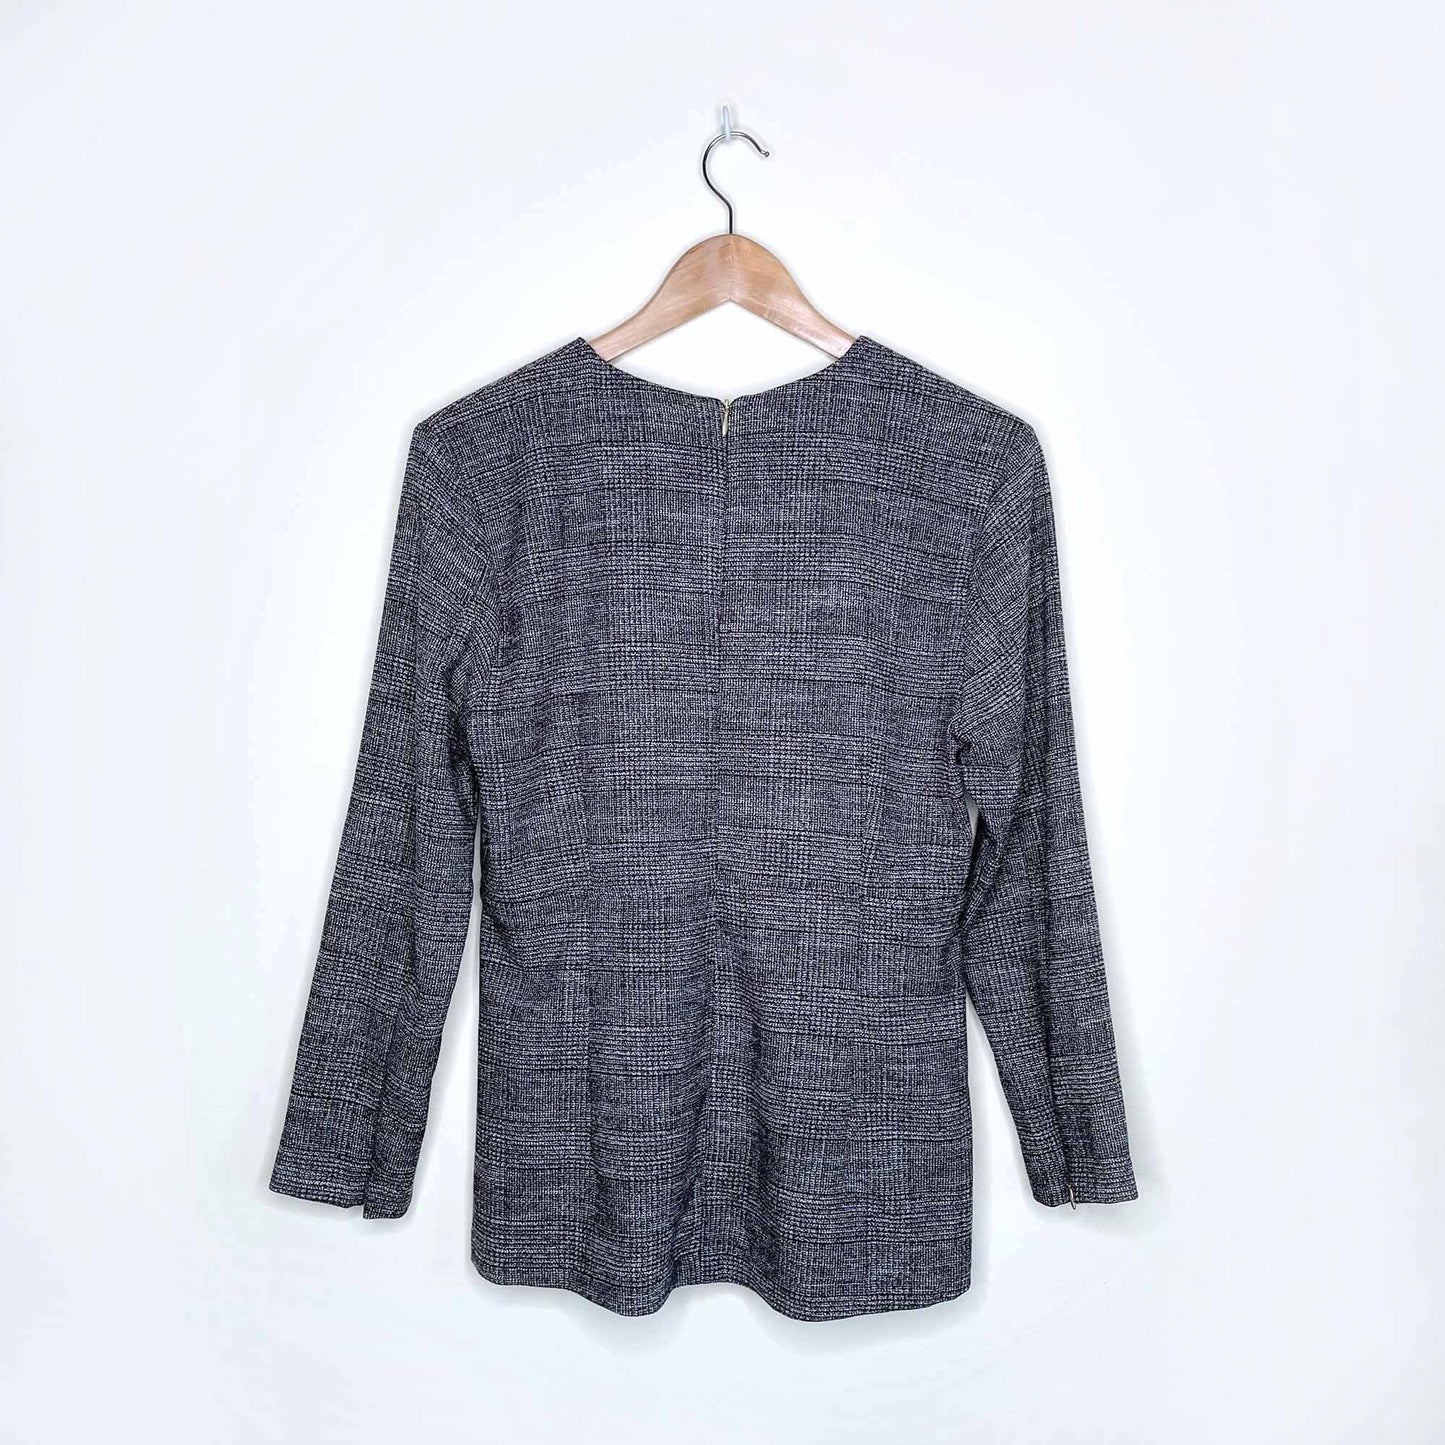 nwt h&m suited peplum long sleeve work top - size 12